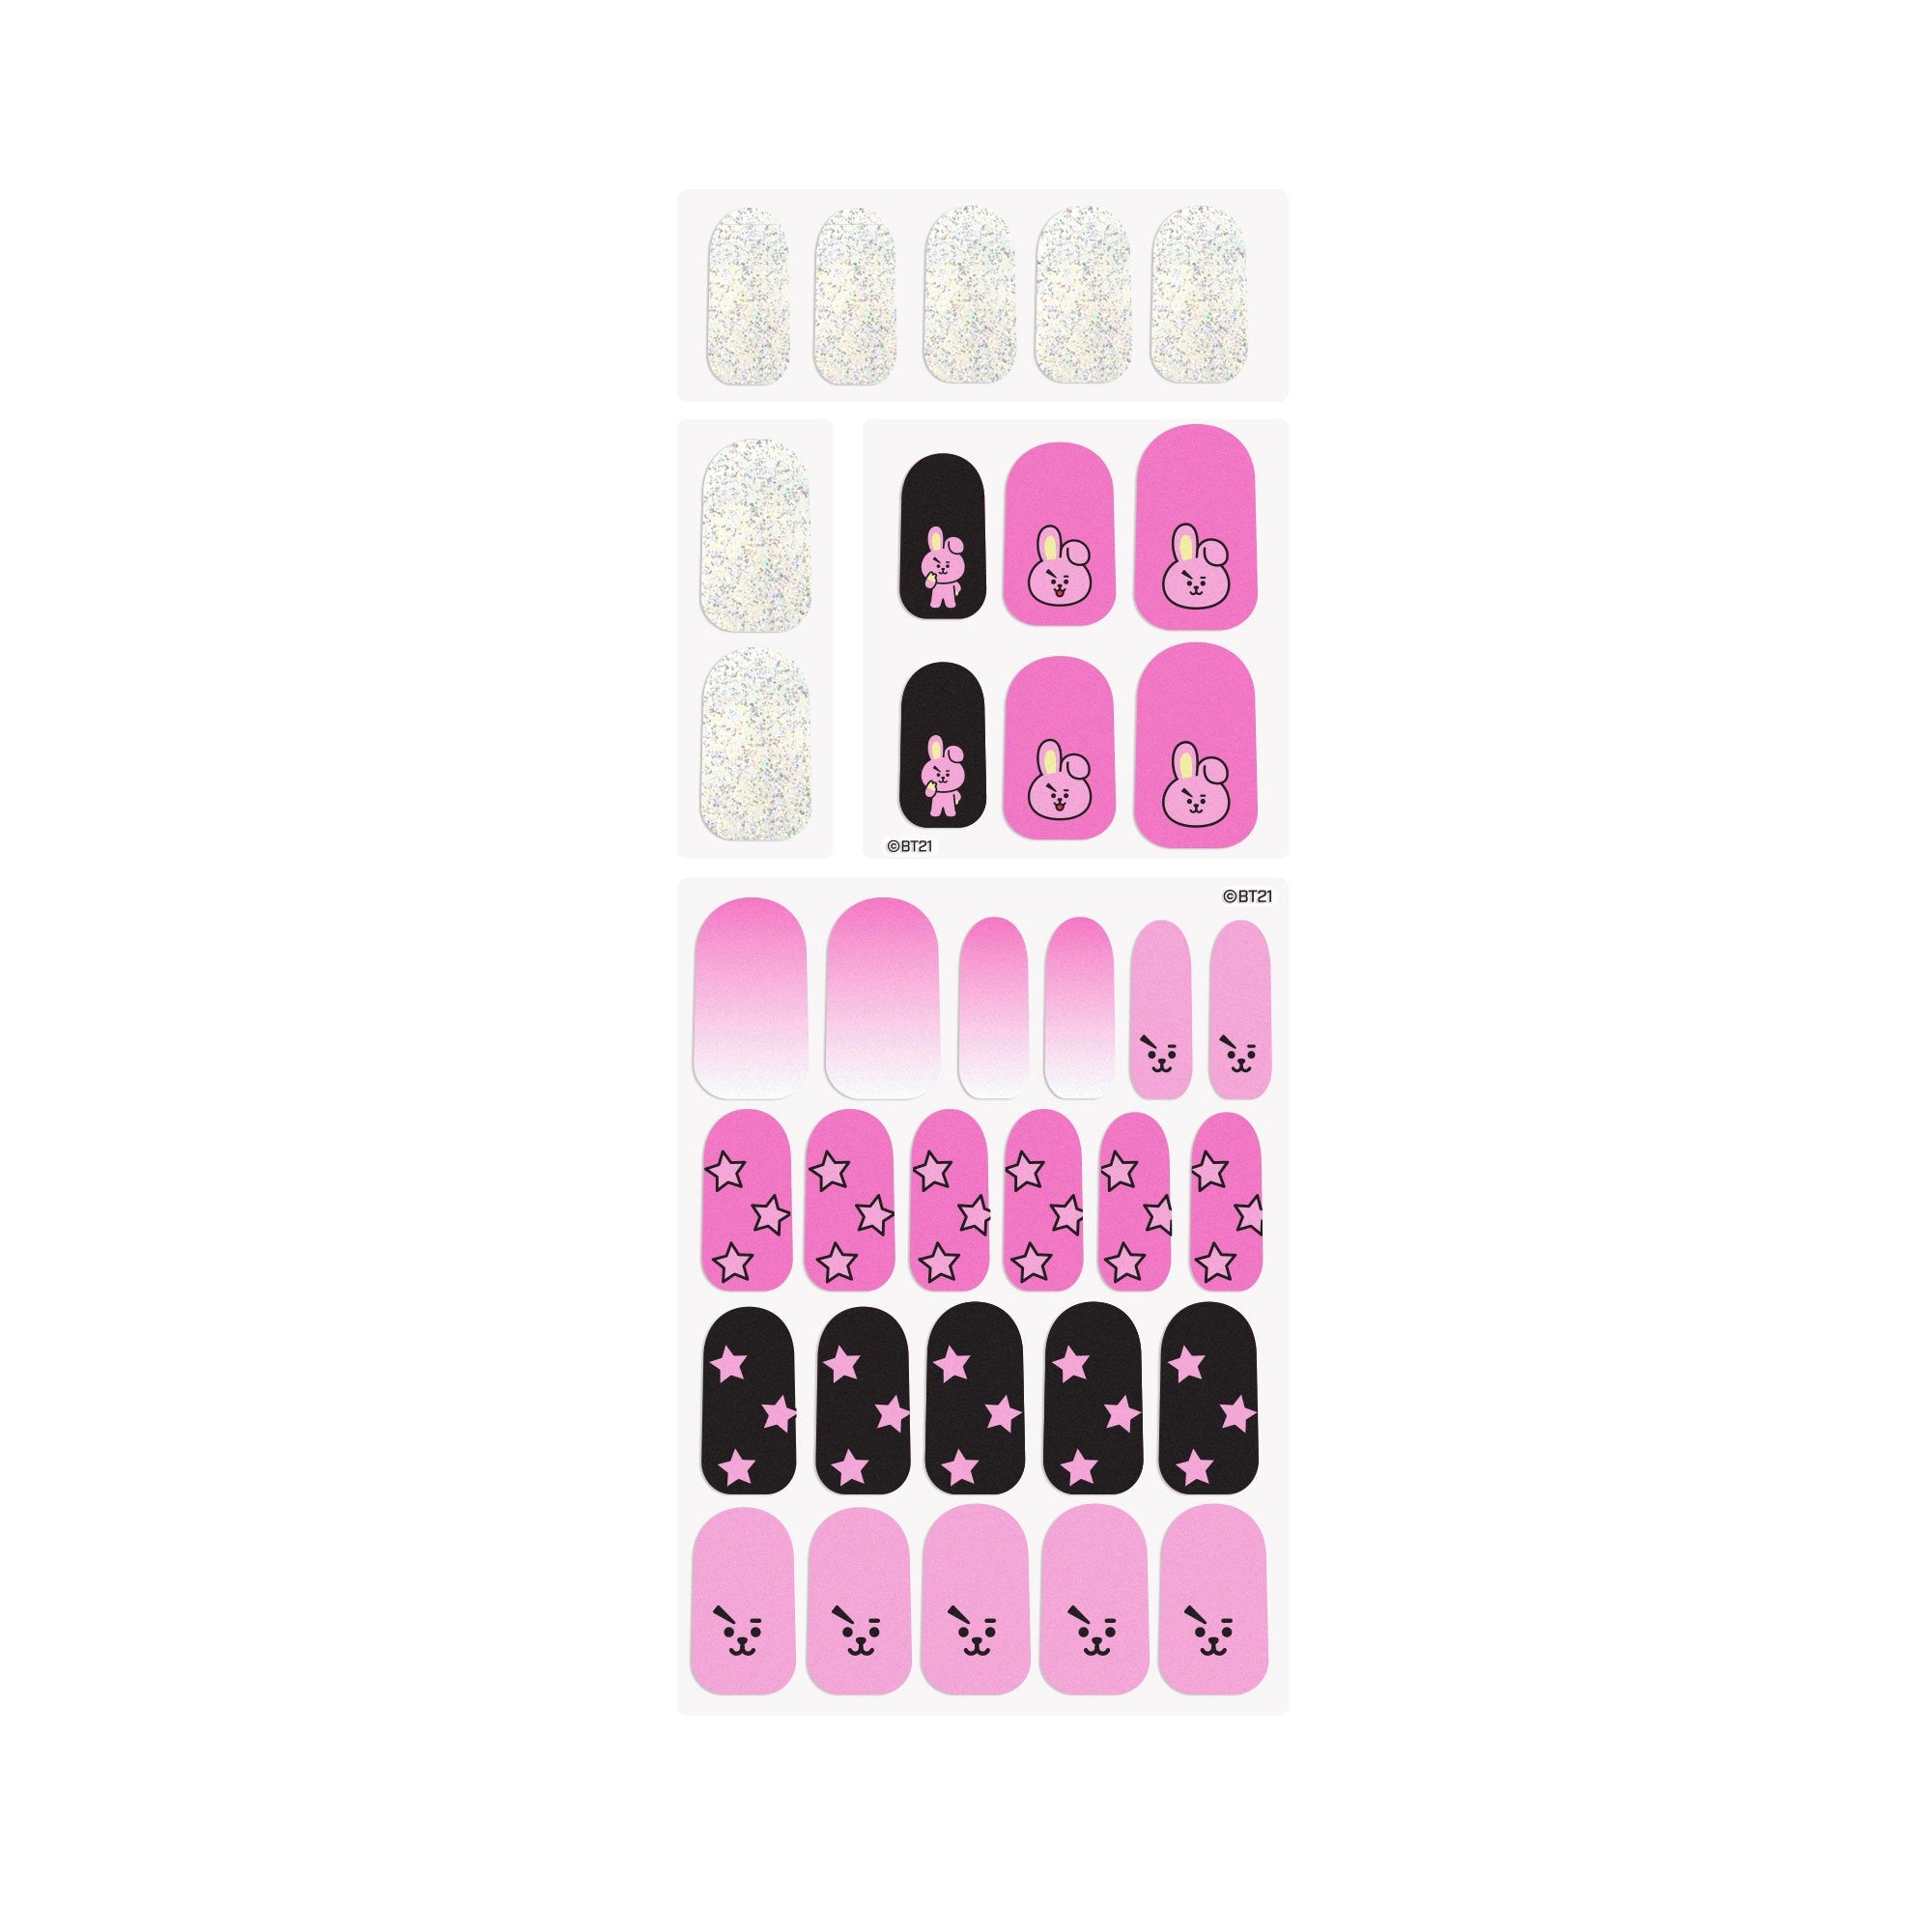 Top 10 Best Quality Professional Nail Art Set Kits in 2023 Reviews - YouTube